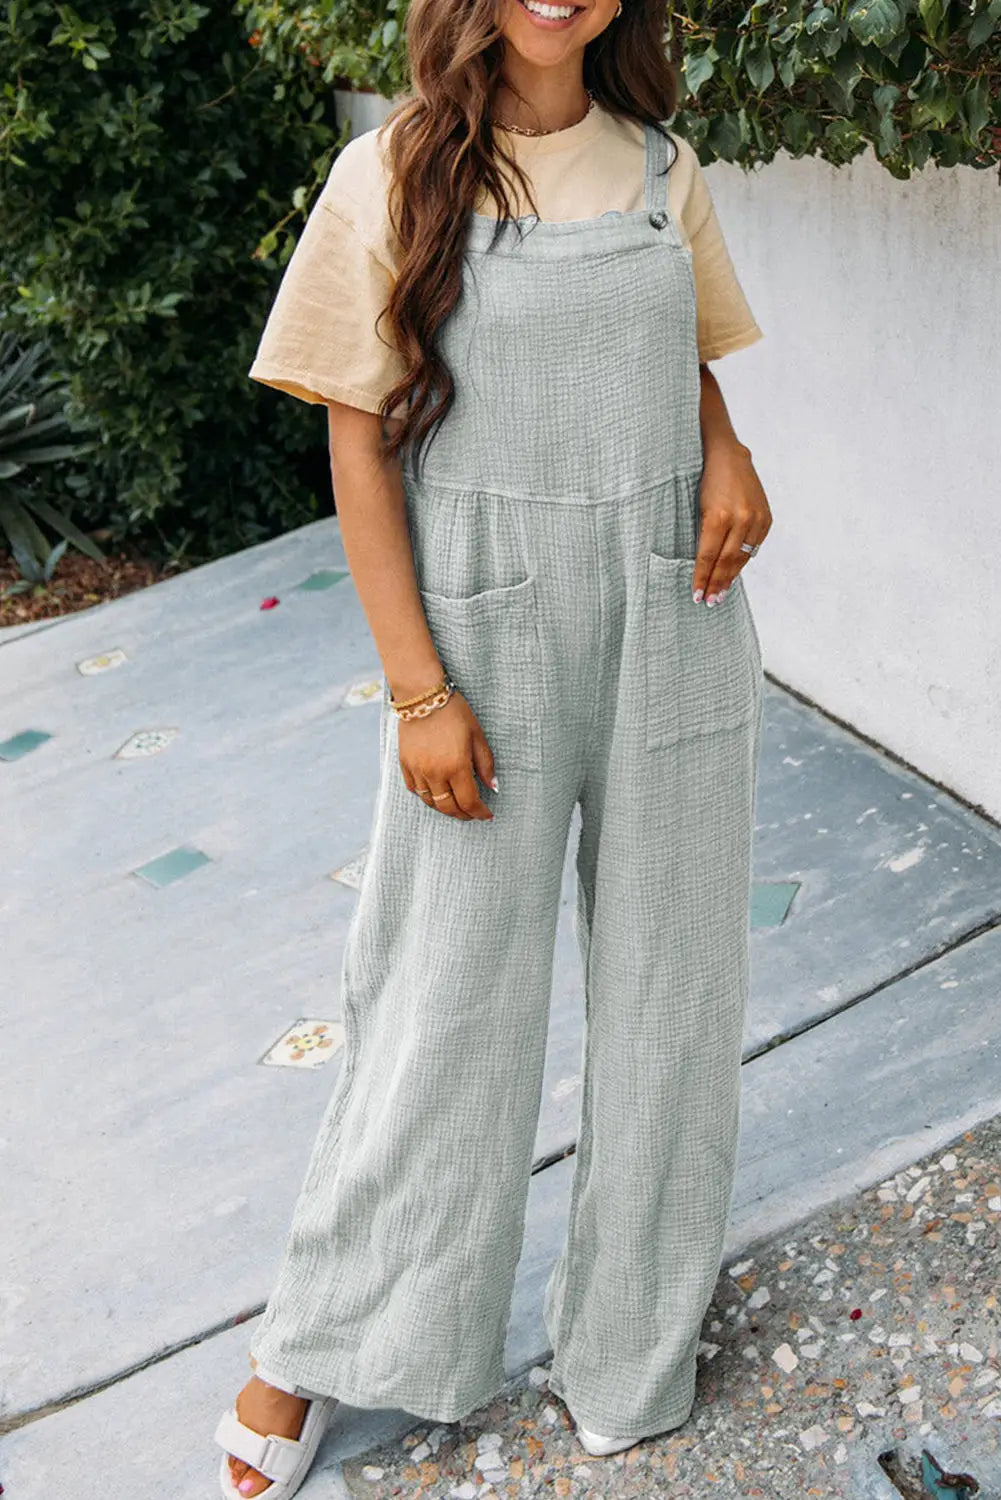 Gray textured wide leg overall with pockets - bottoms